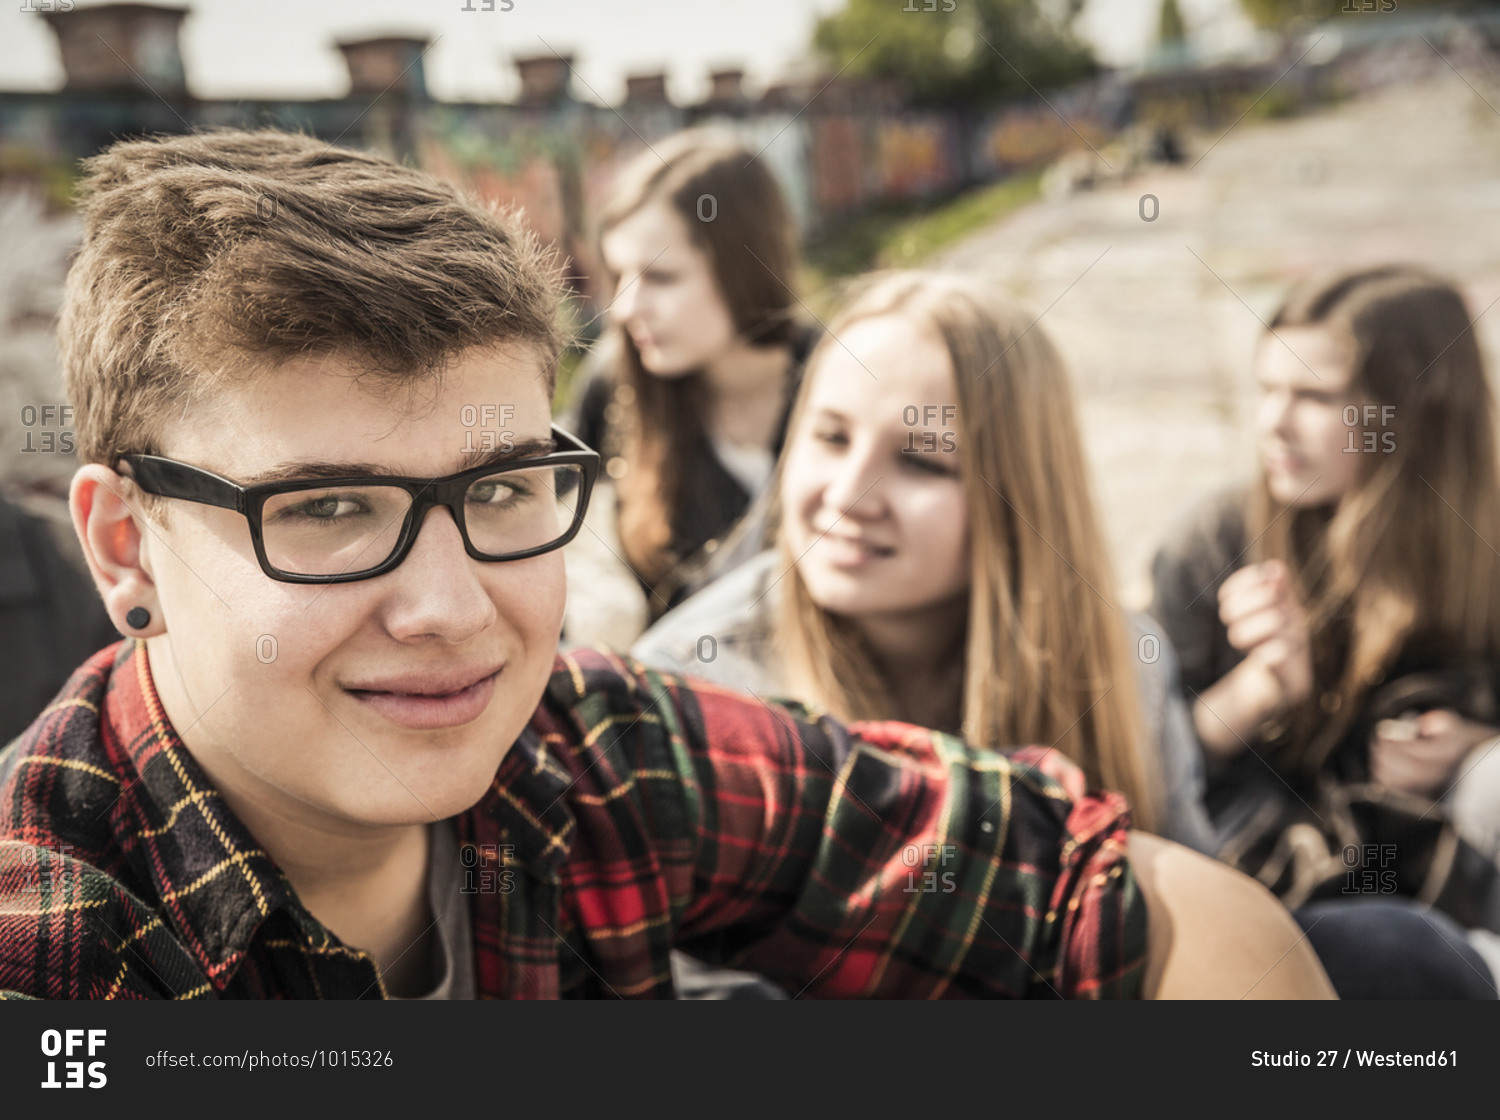 Portrait of smiling teenage hanging out with friends in an old run down industrial area